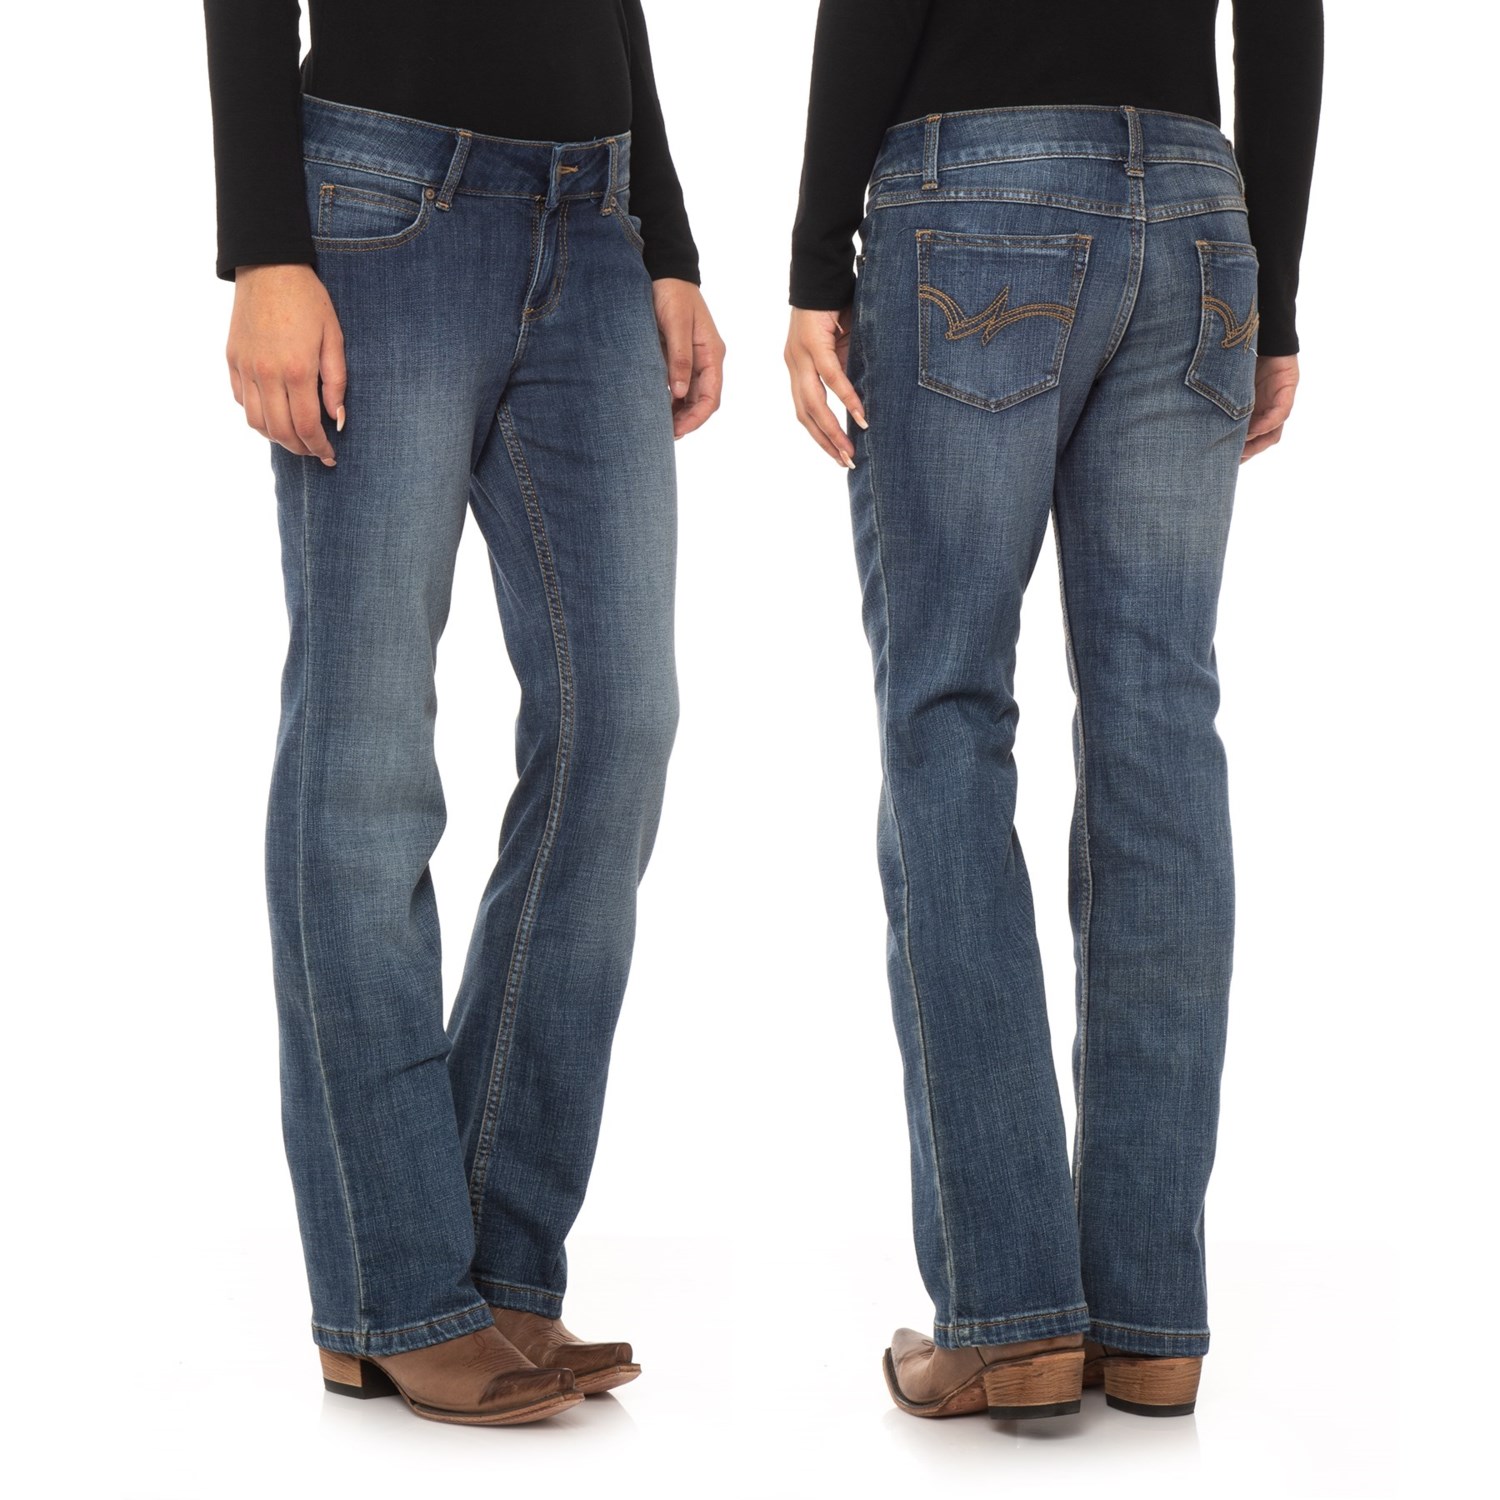 Wrangler Retro Mae Bootcut Jeans – Low Rise (For Women)